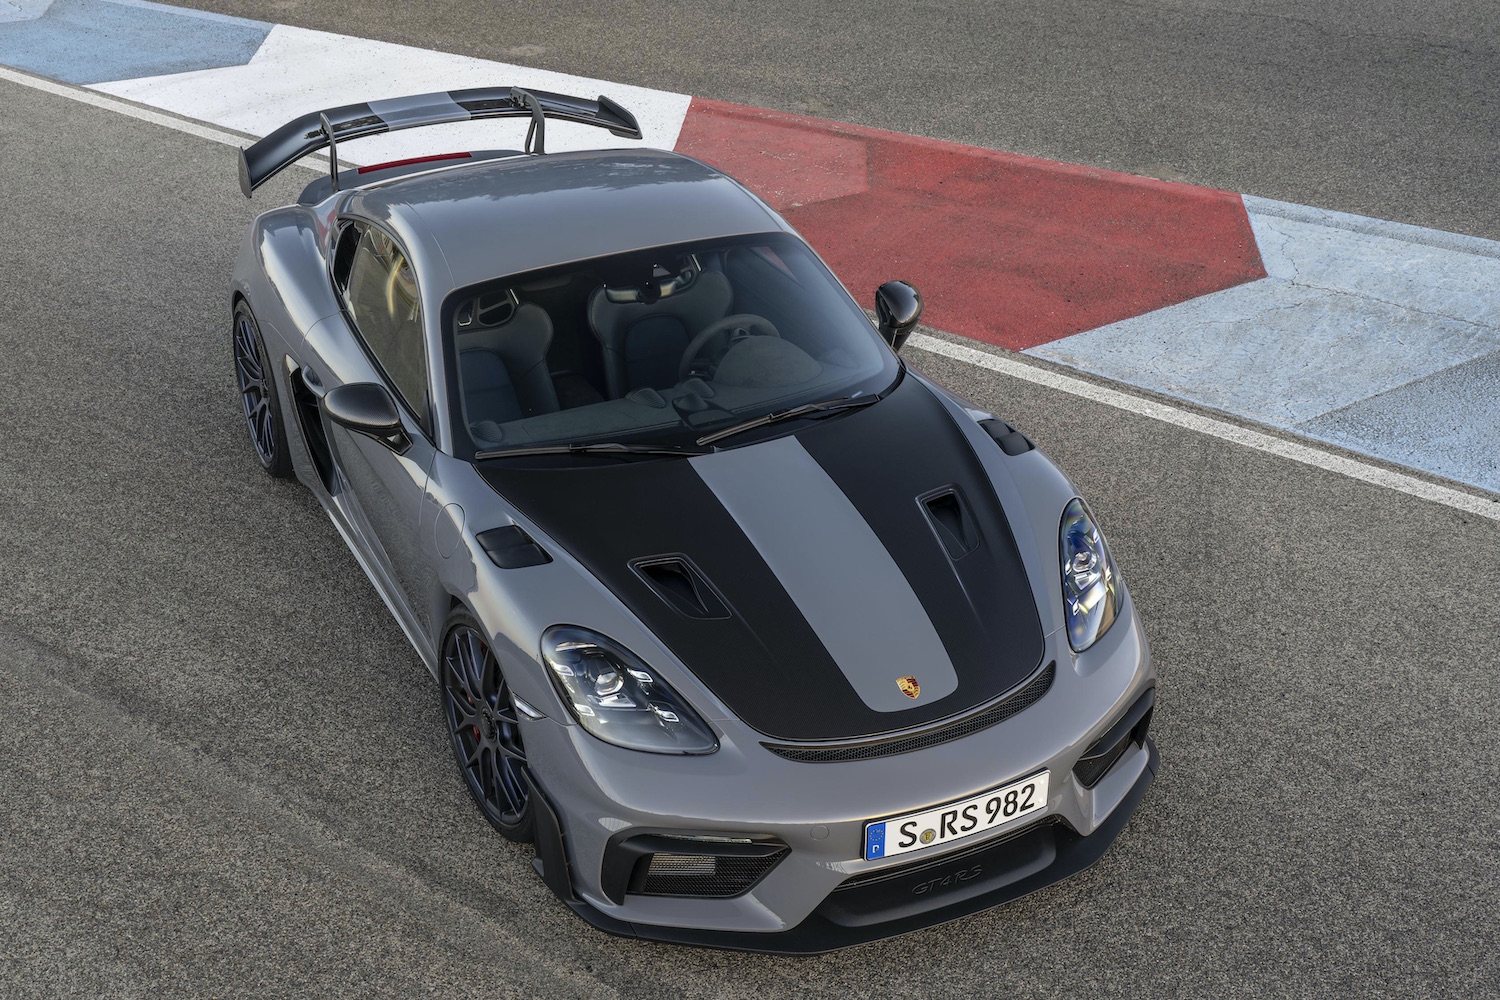 Porsche 718 Cayman GT4 RS front end from top on track.